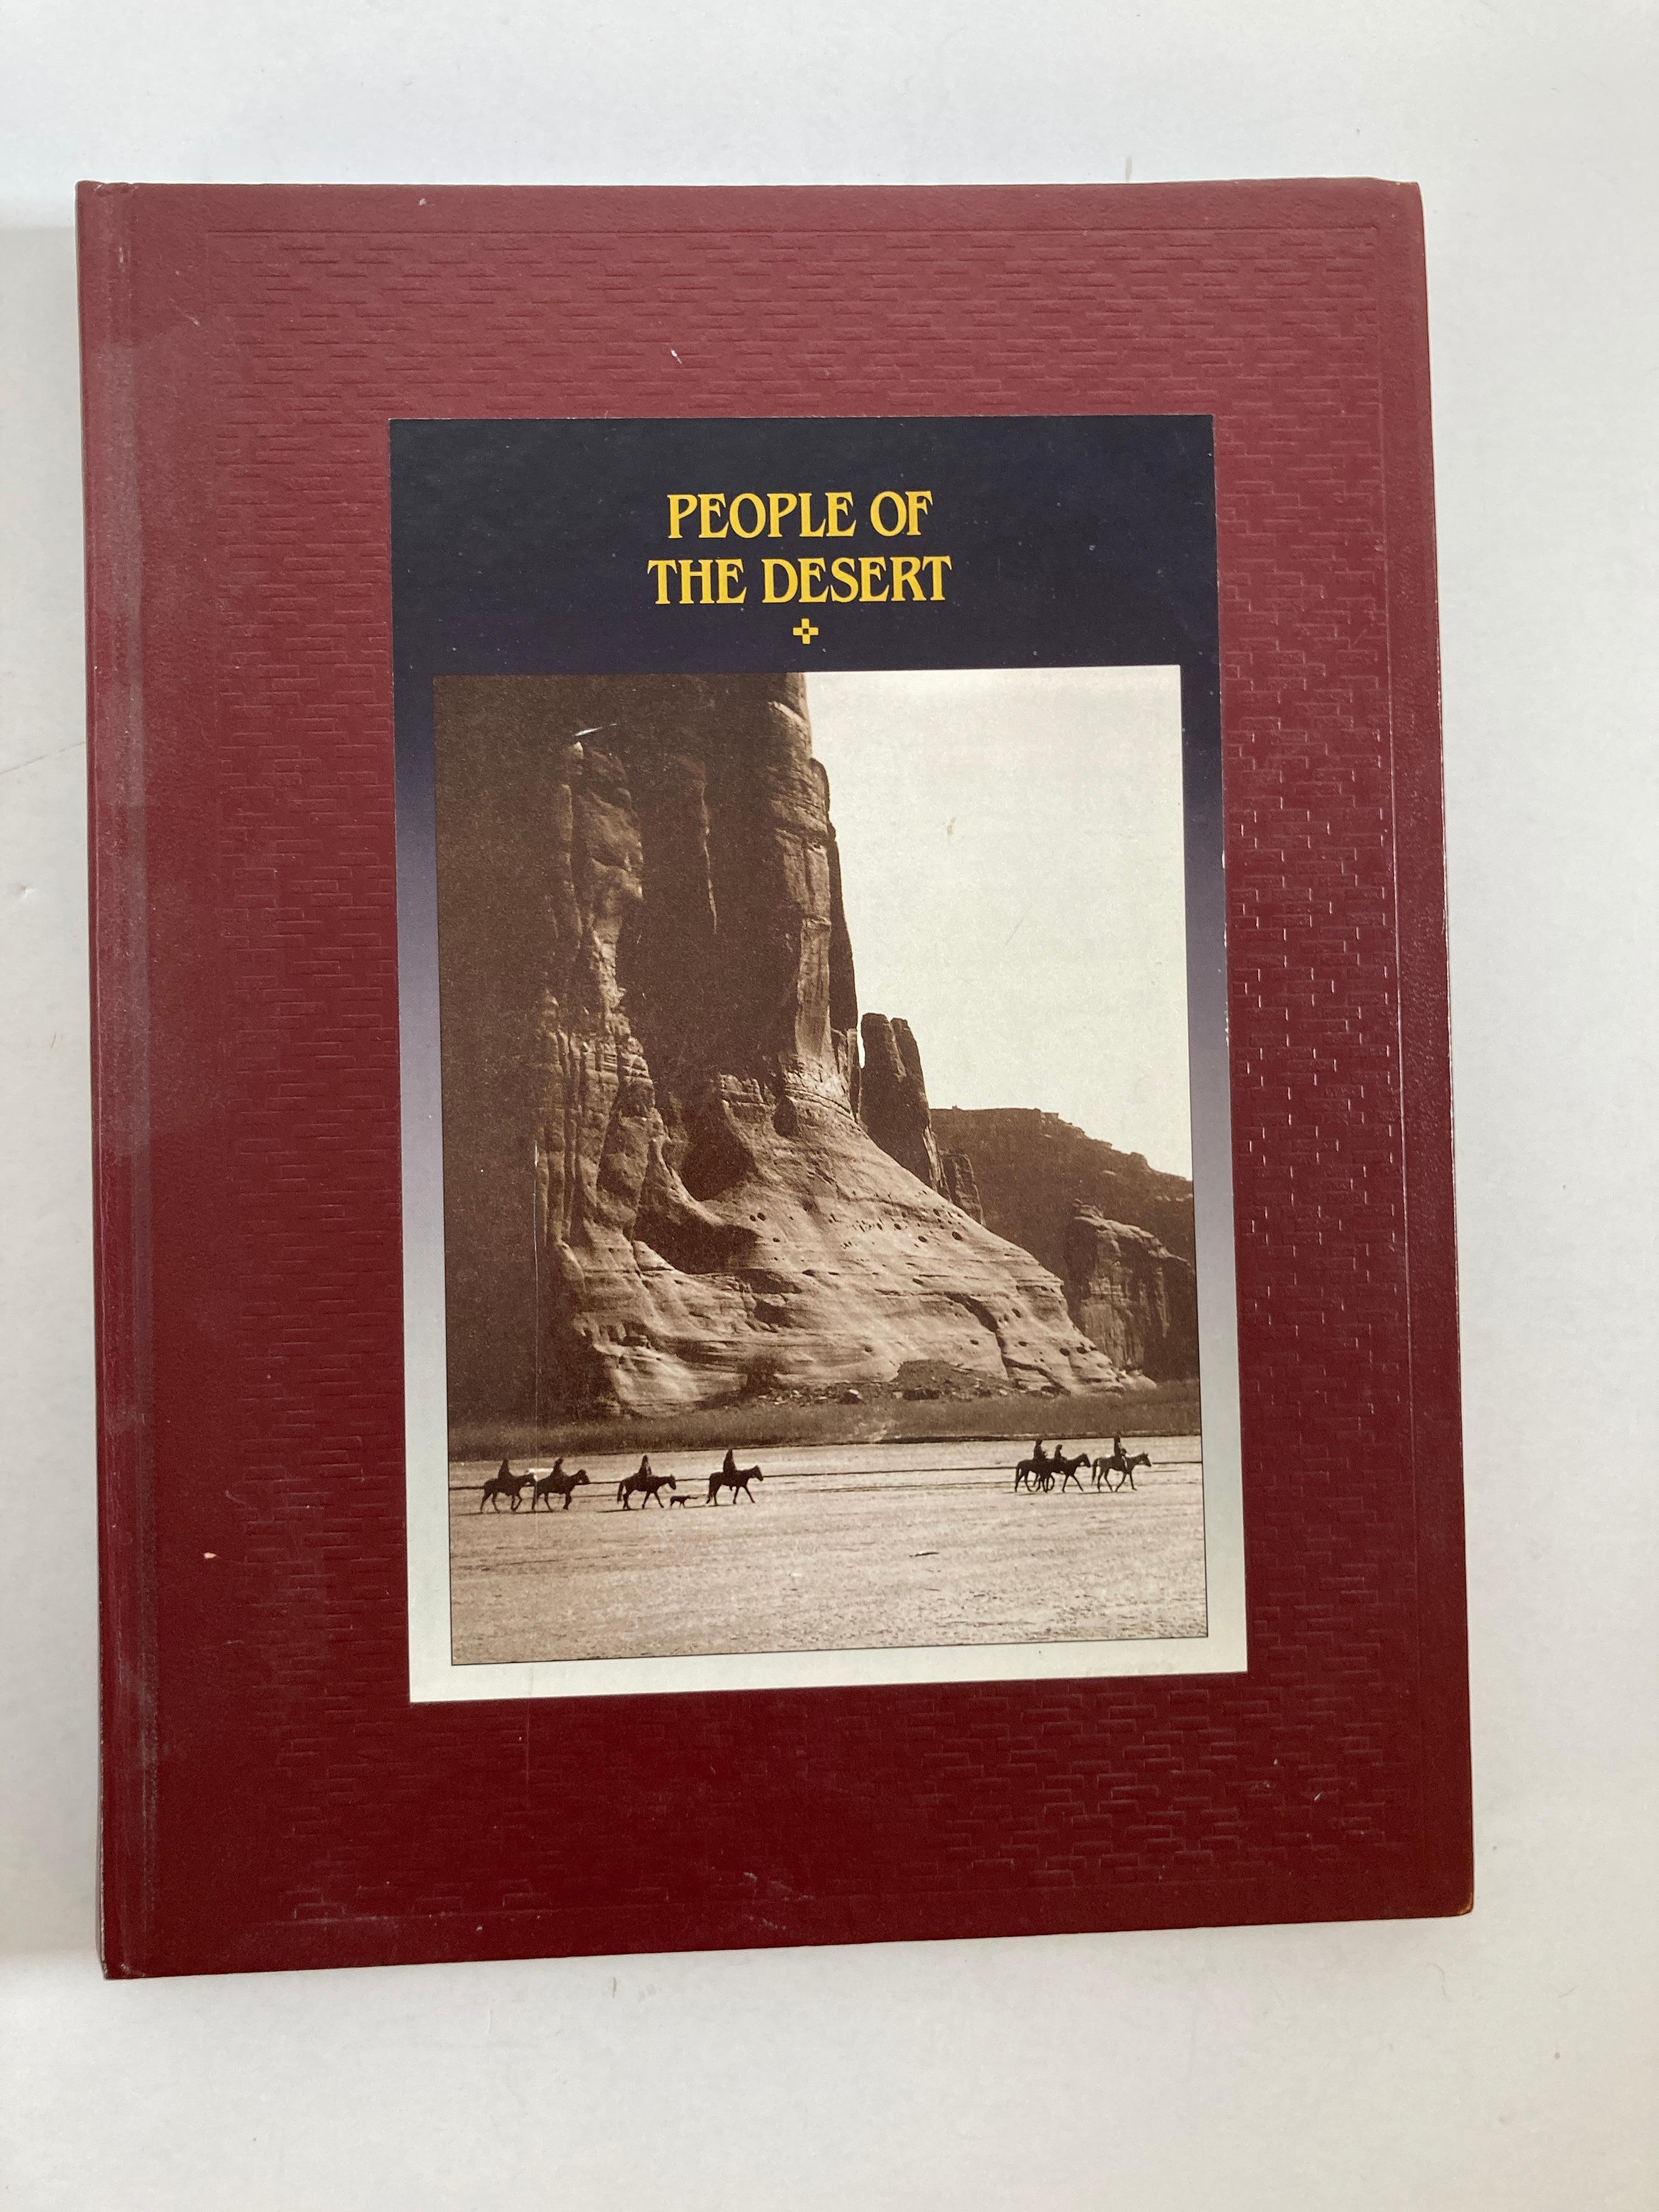 The American Indians, The Way of the Warriors and People of the Desert Books 6